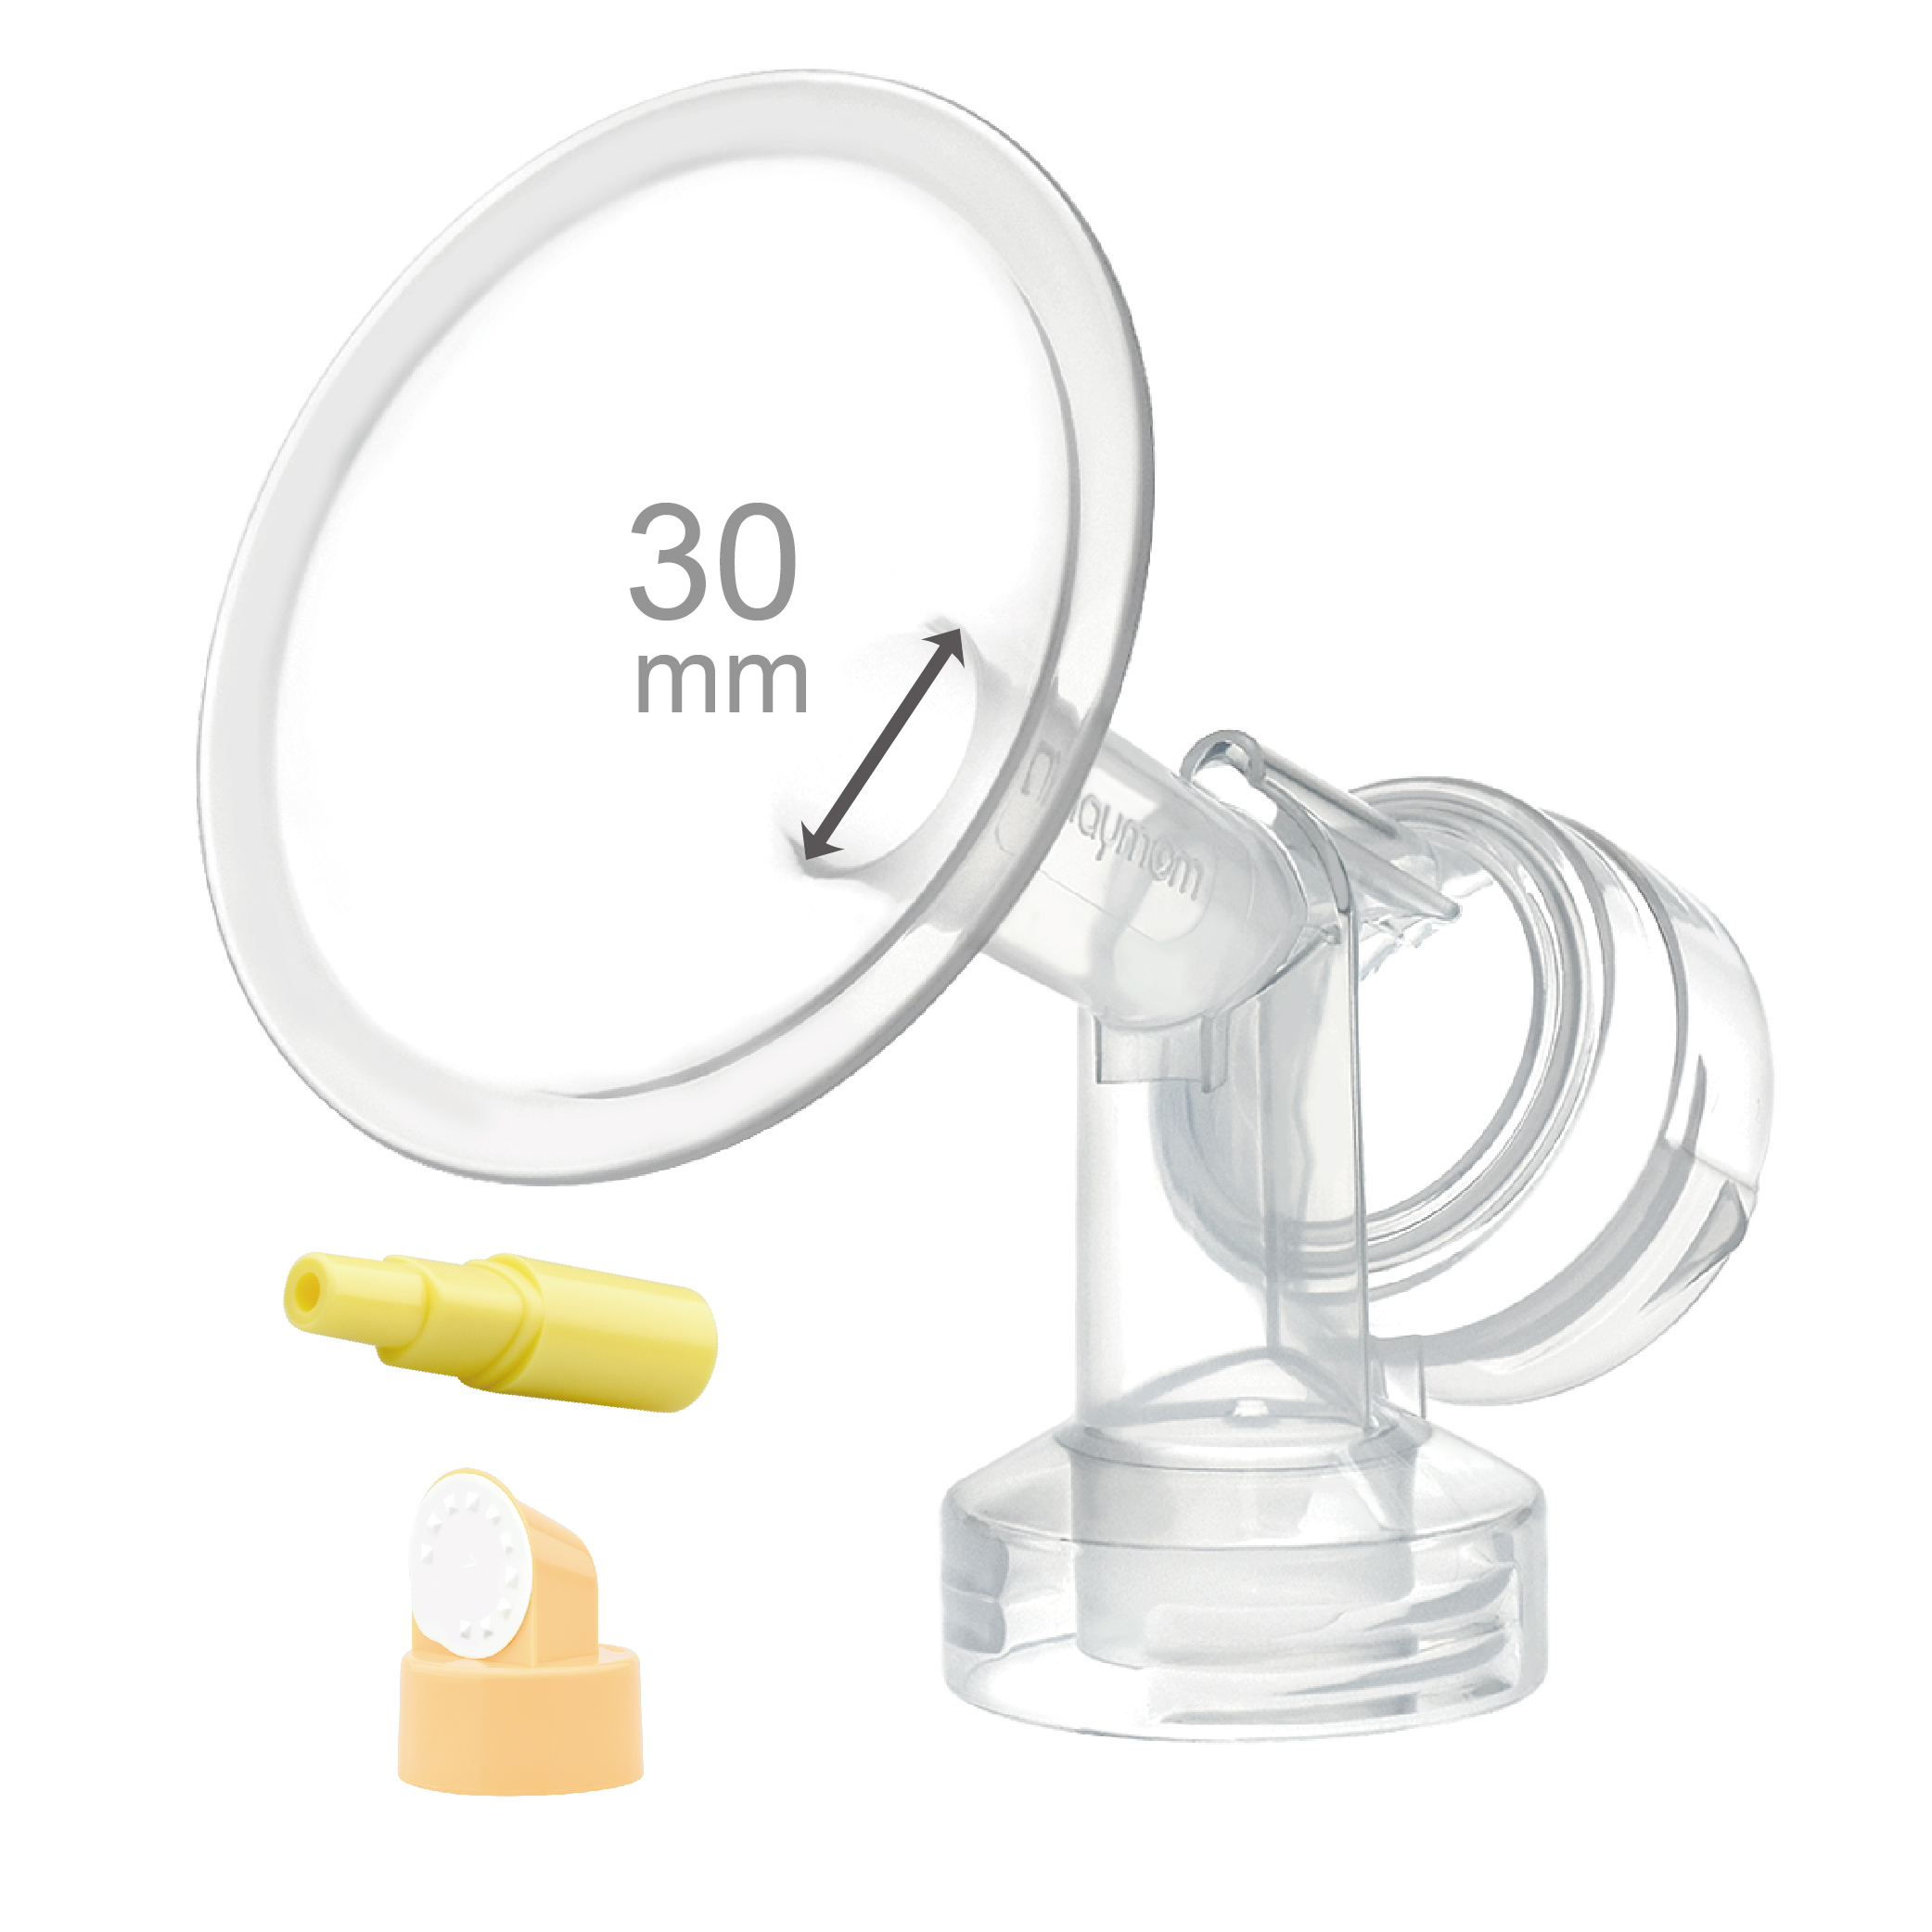 (image for) 30 mm Extra Small Flange w/ Valve and Membrane for SpeCtra Breast Pumps S1, S2, M1, Spectra 9; Narrow (Standard) Bottle Neck; 1 pc